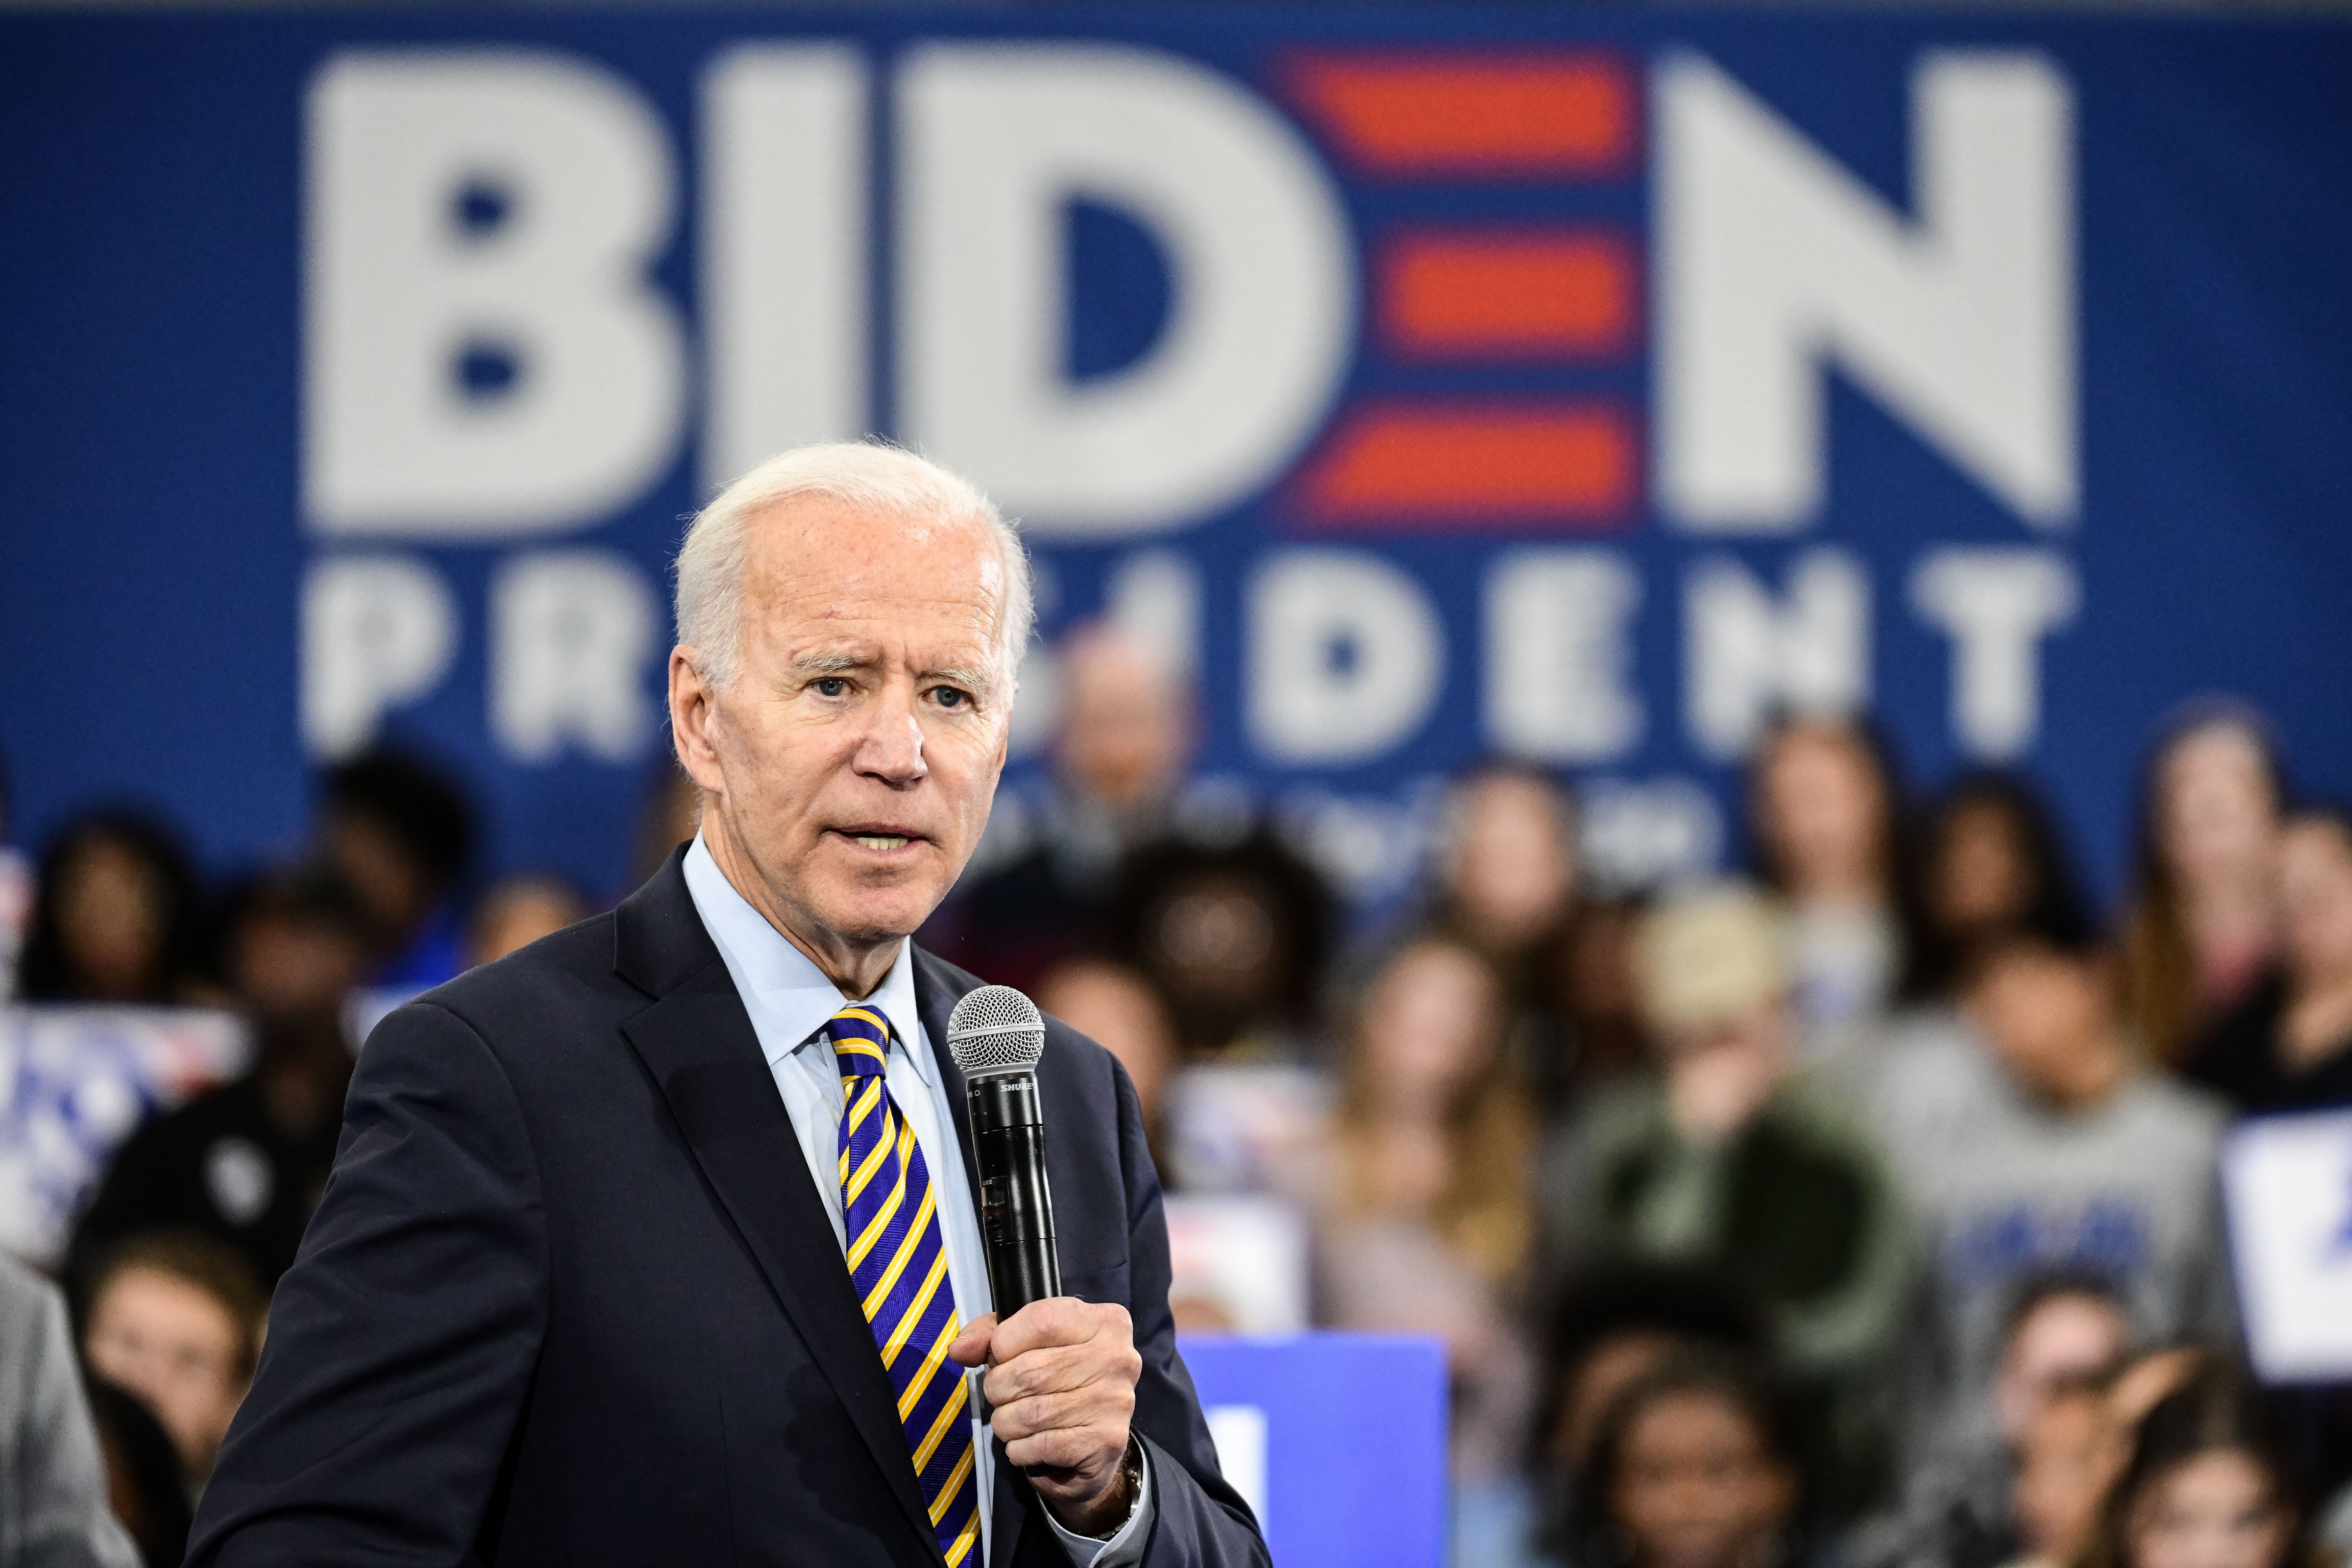 GREENWOOD, SC - NOVEMBER 21: Democratic presidential candidate Joe Biden speaks to the audience during a town hall on Nov. 21, 2019 in Greenwood, South Carolina. (Sean Rayford—Getty Images)